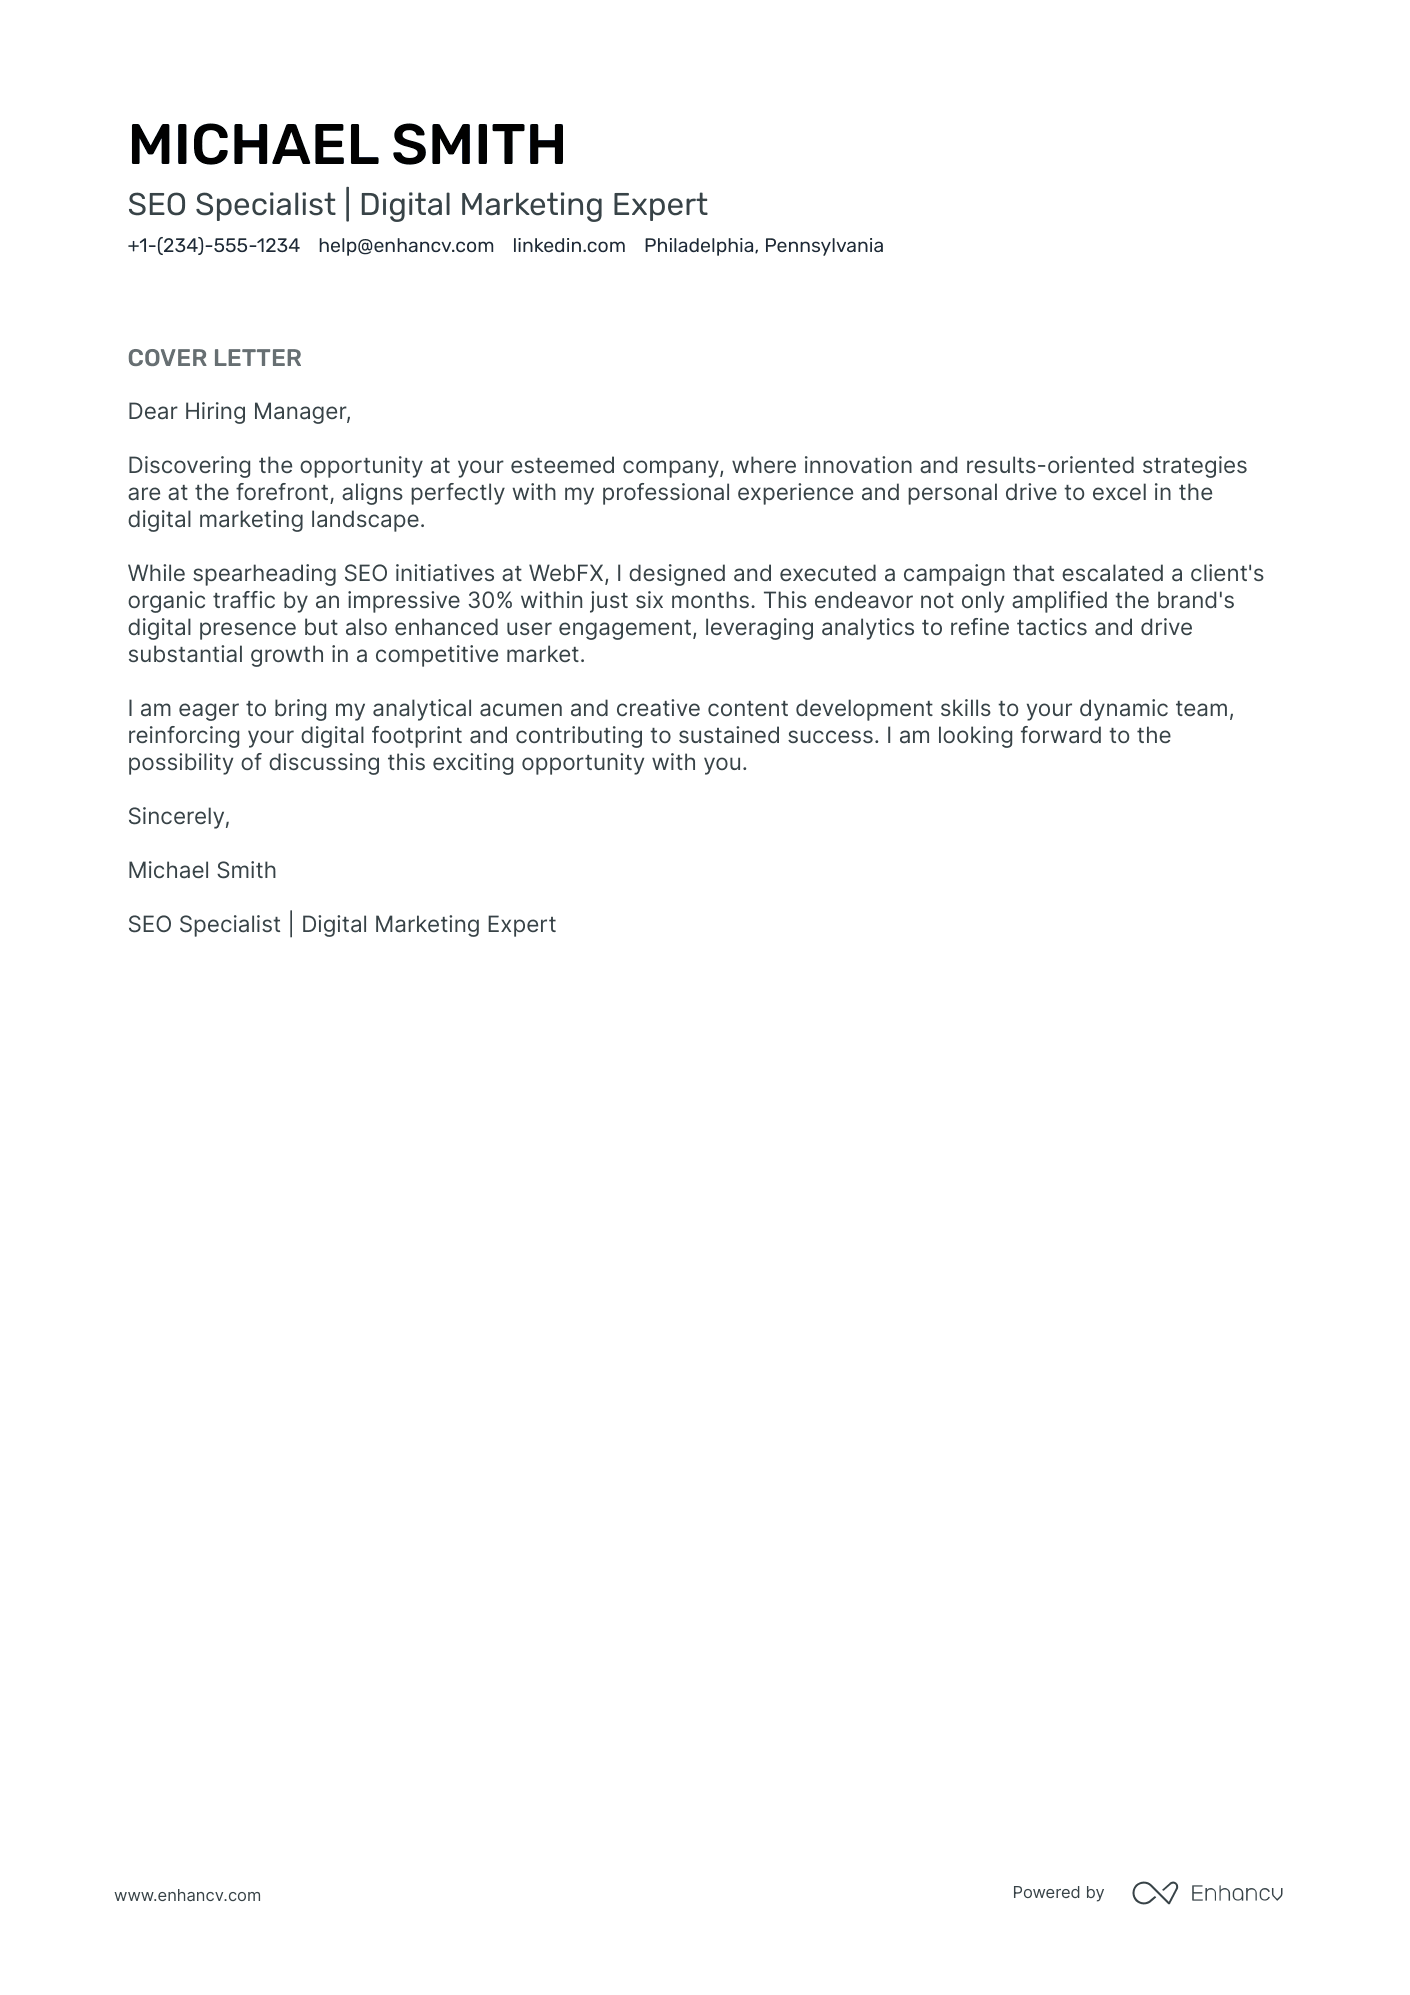 SEO Specialist cover letter